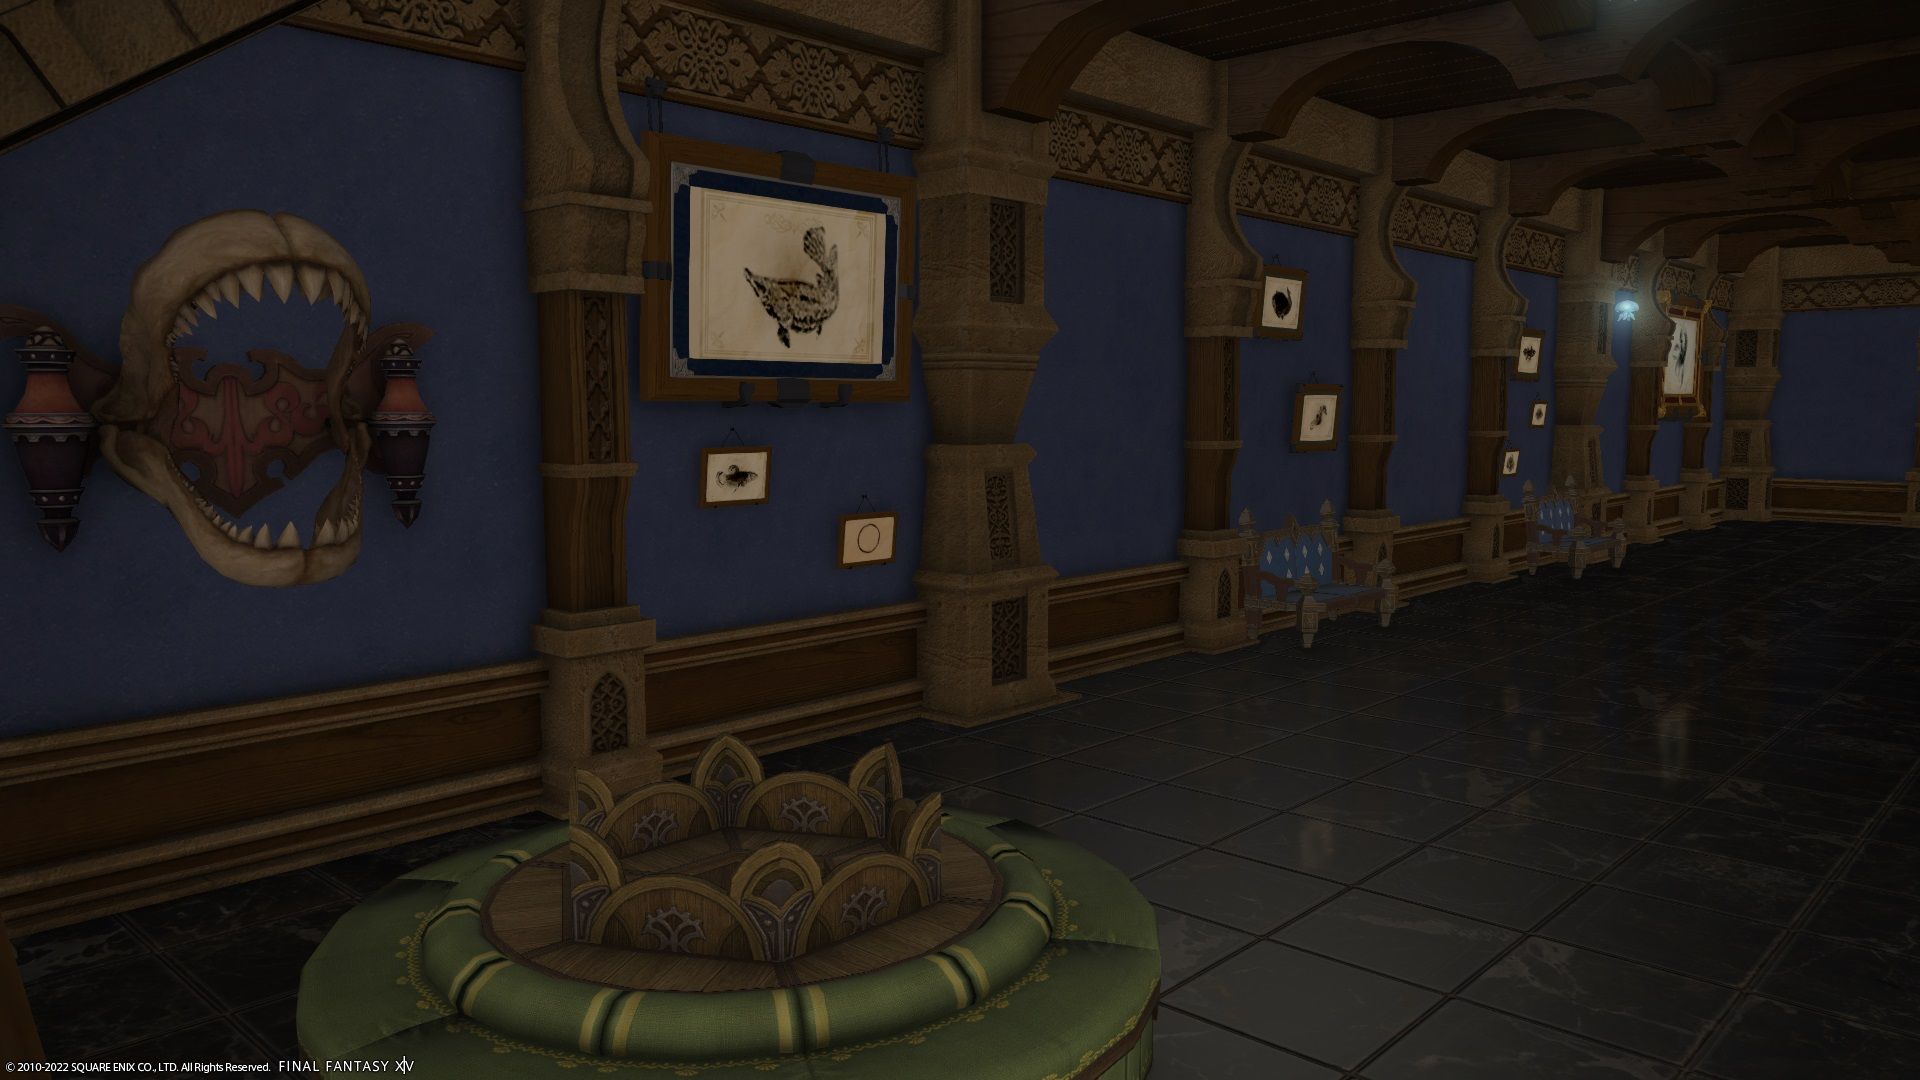 The Final Fantasy 14 Nature Museum